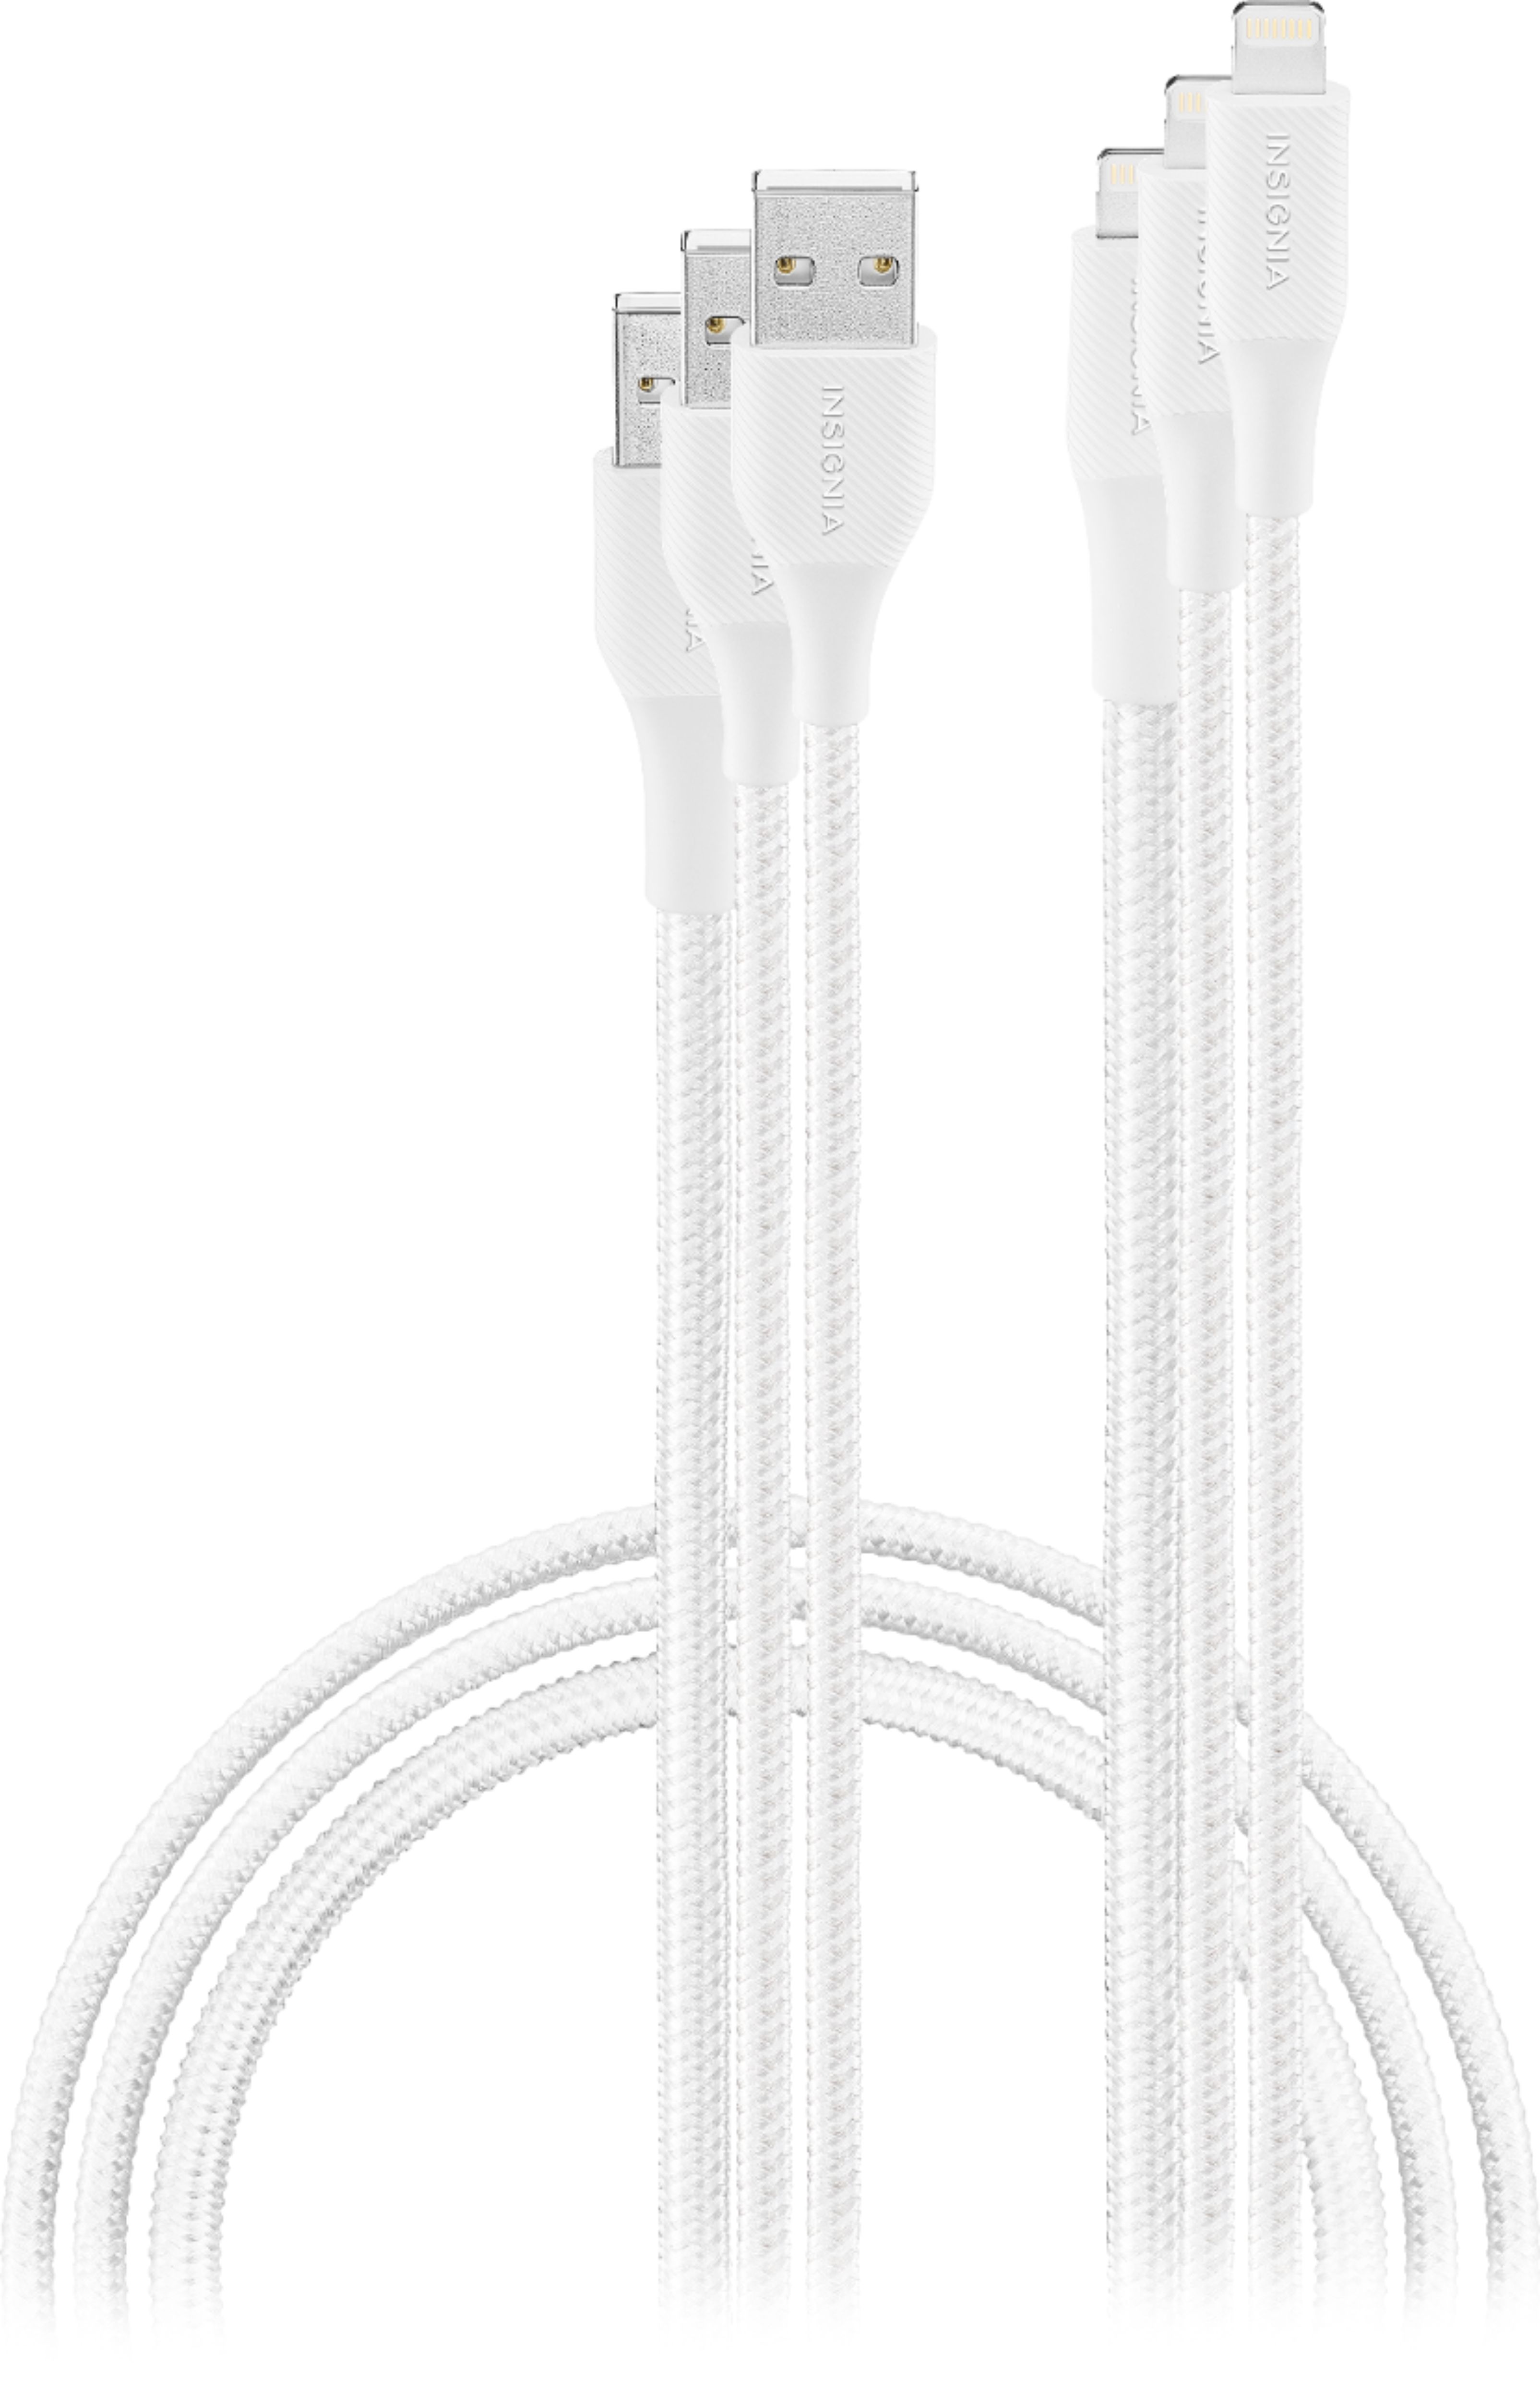 Festival USB-C to Lightning Cable [10 ft / 3m length] – Charge Cords